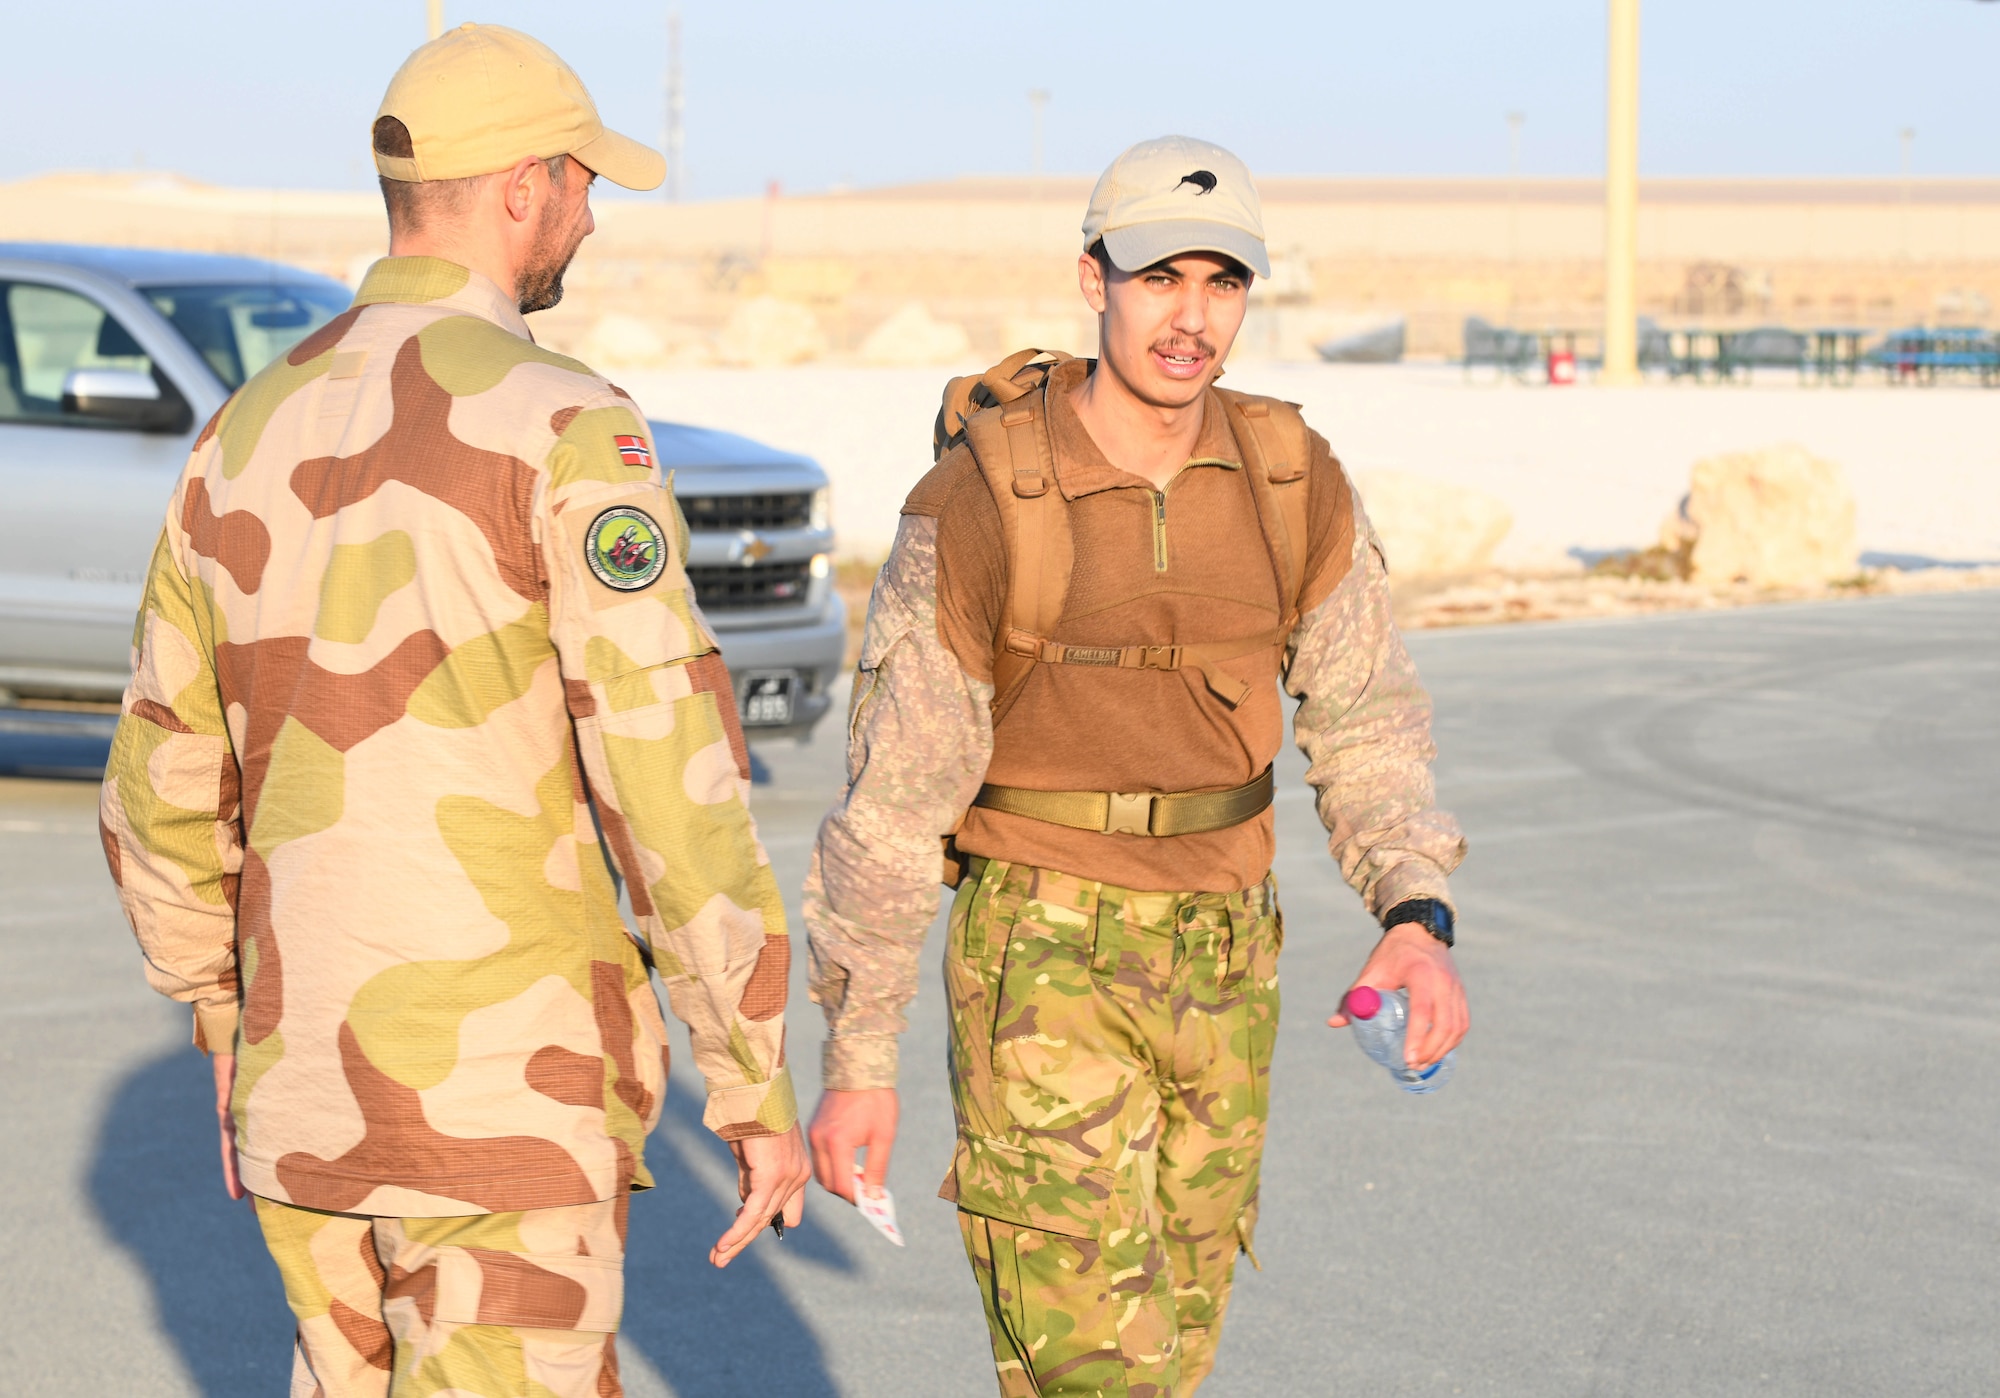 New Zealand army Lance Cpl. Micah Sears walks past Norwegian armed forces Capt. Magne Rambo at the progress checkpoint during the traditional 30-kilometer (18.6-mile) Norwegian foot march event held at Al Udeid Air Base, Qatar, Dec. 5, 2020. The tradition began in 1915, 10 years after Norway gained its independence from Sweden and has become a rite of passage for all Norwegian military members. Sears joined nearly 120 other coalition members, including Americans, Australians, British and Canadians who participated in the march under the supervision of Rambo, deployed to Al Udeid AB as part of the U.S. Central Command Partner Integration Enterprise. (U.S. Air Force photo by Staff Sgt. Kayla White)